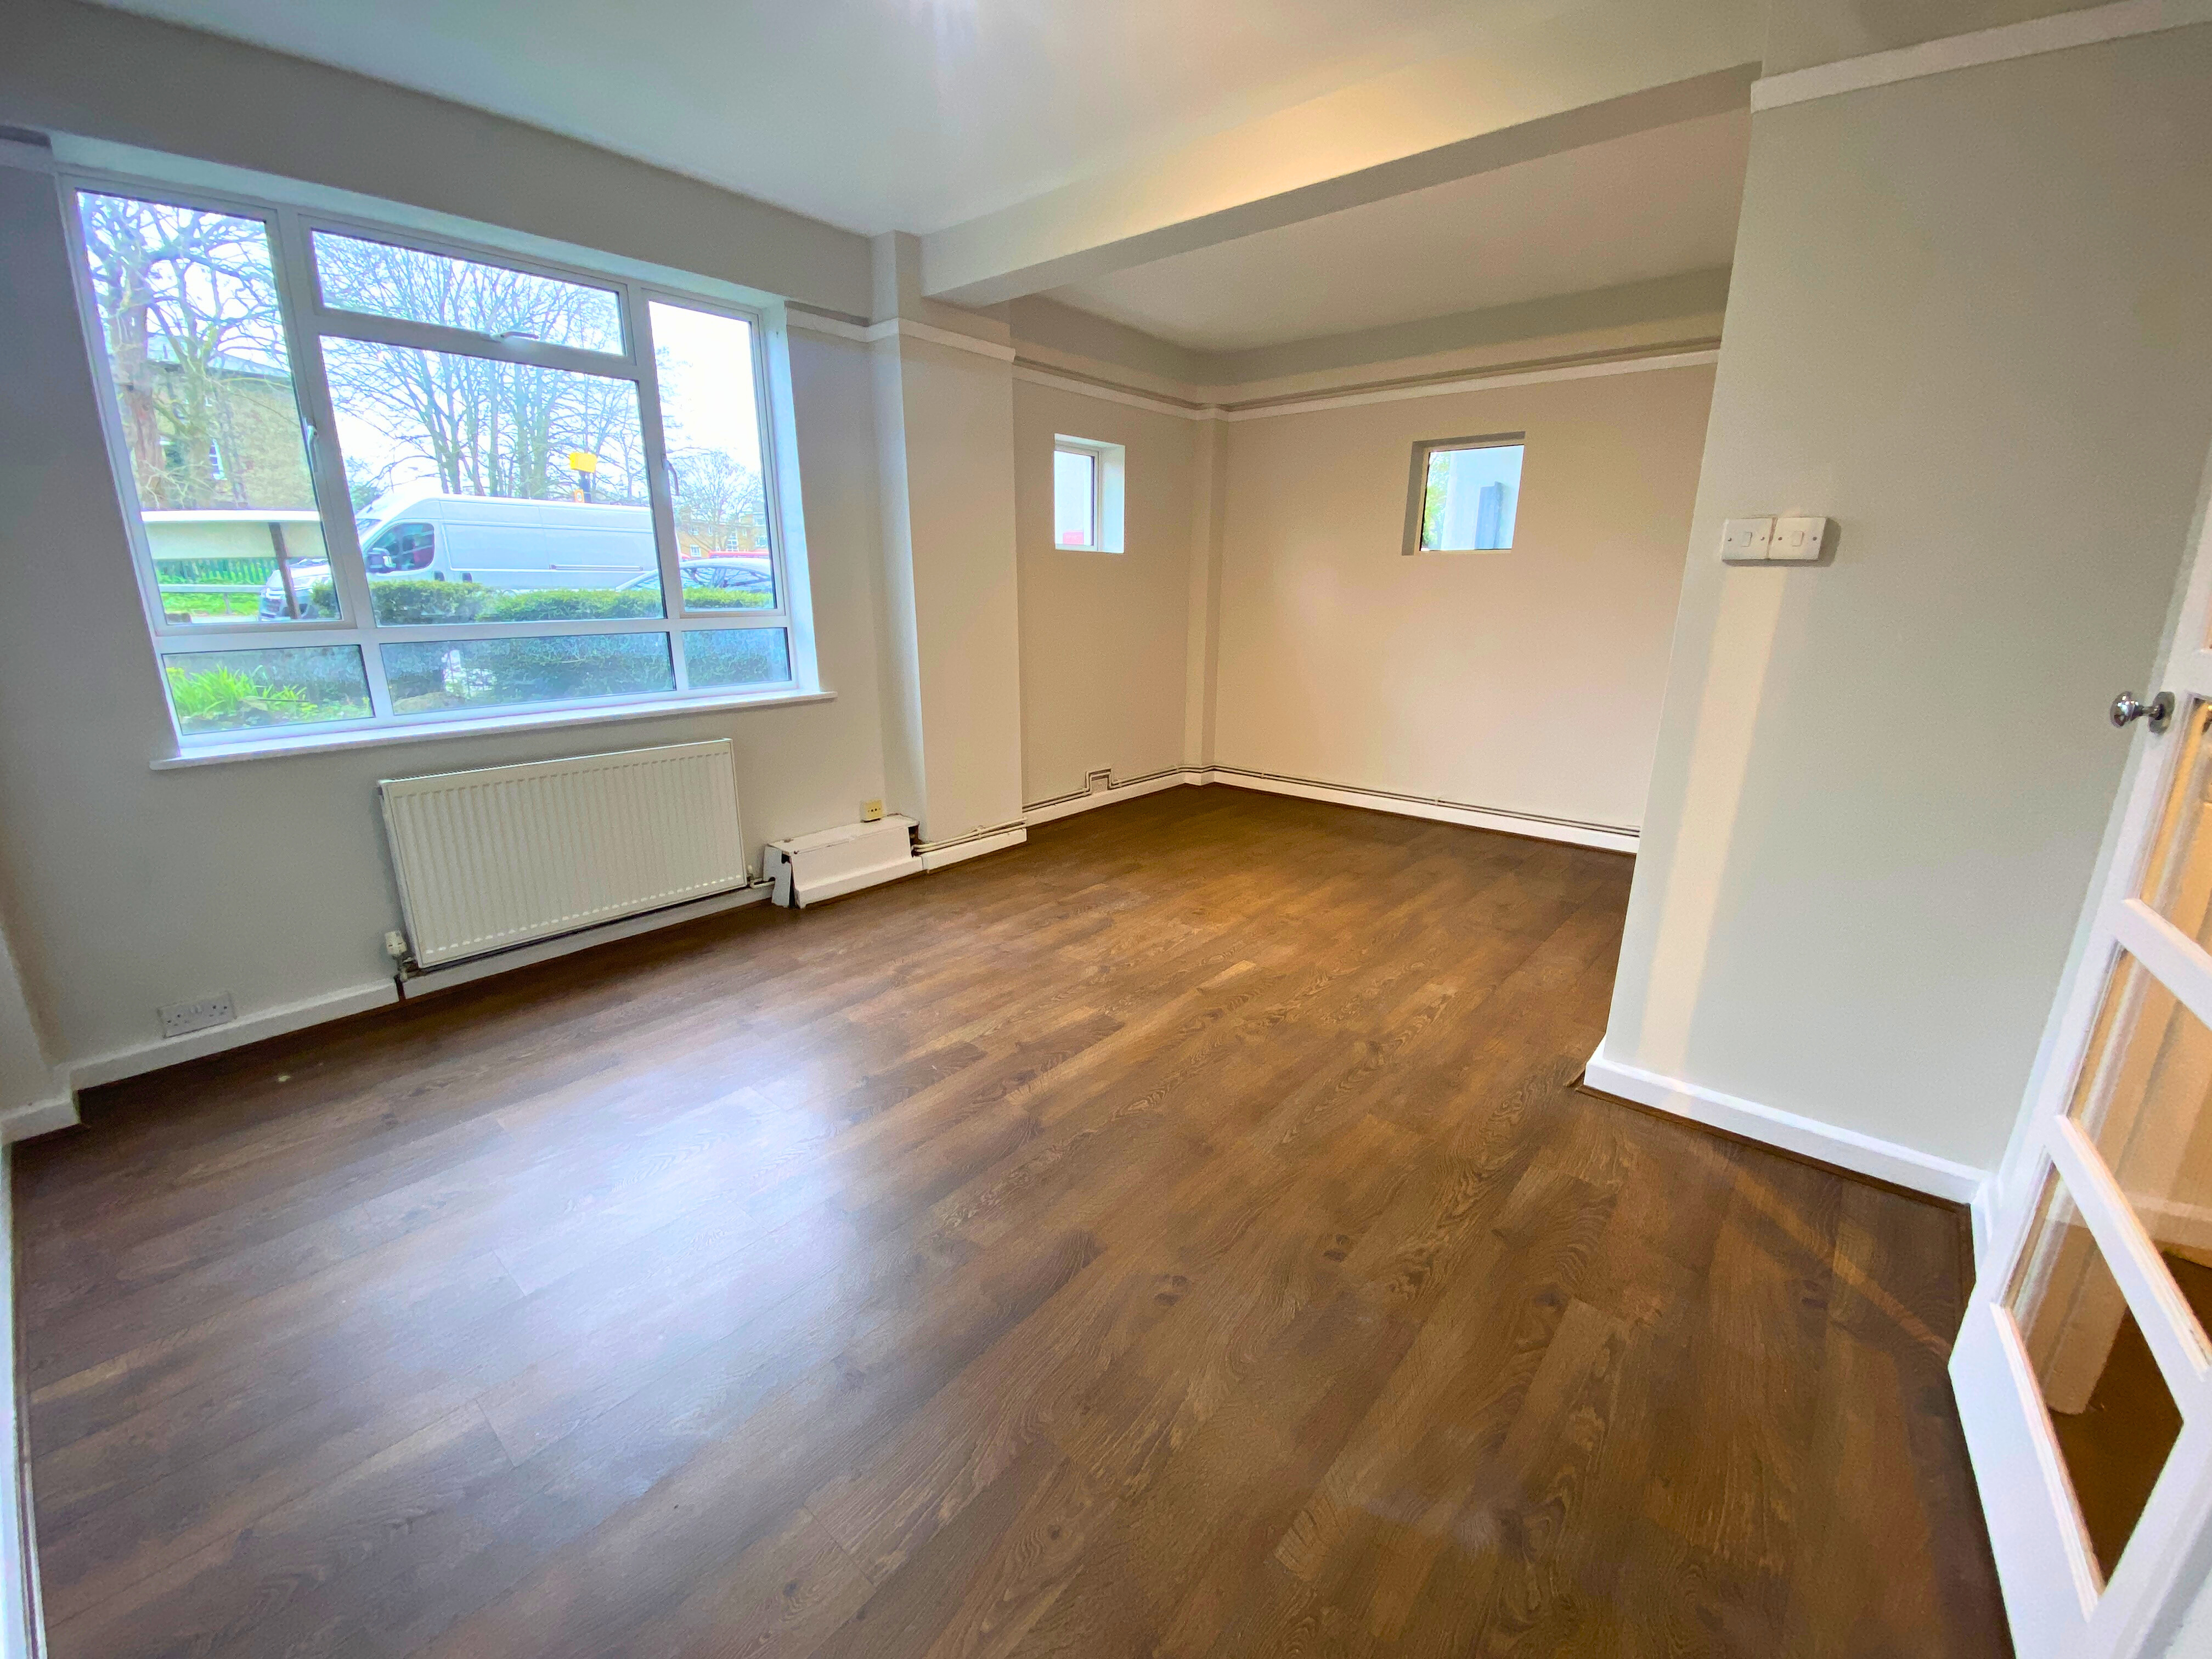 1 bed Apartment/Flat/Studio for rent in Streatham. From PropertyLoop